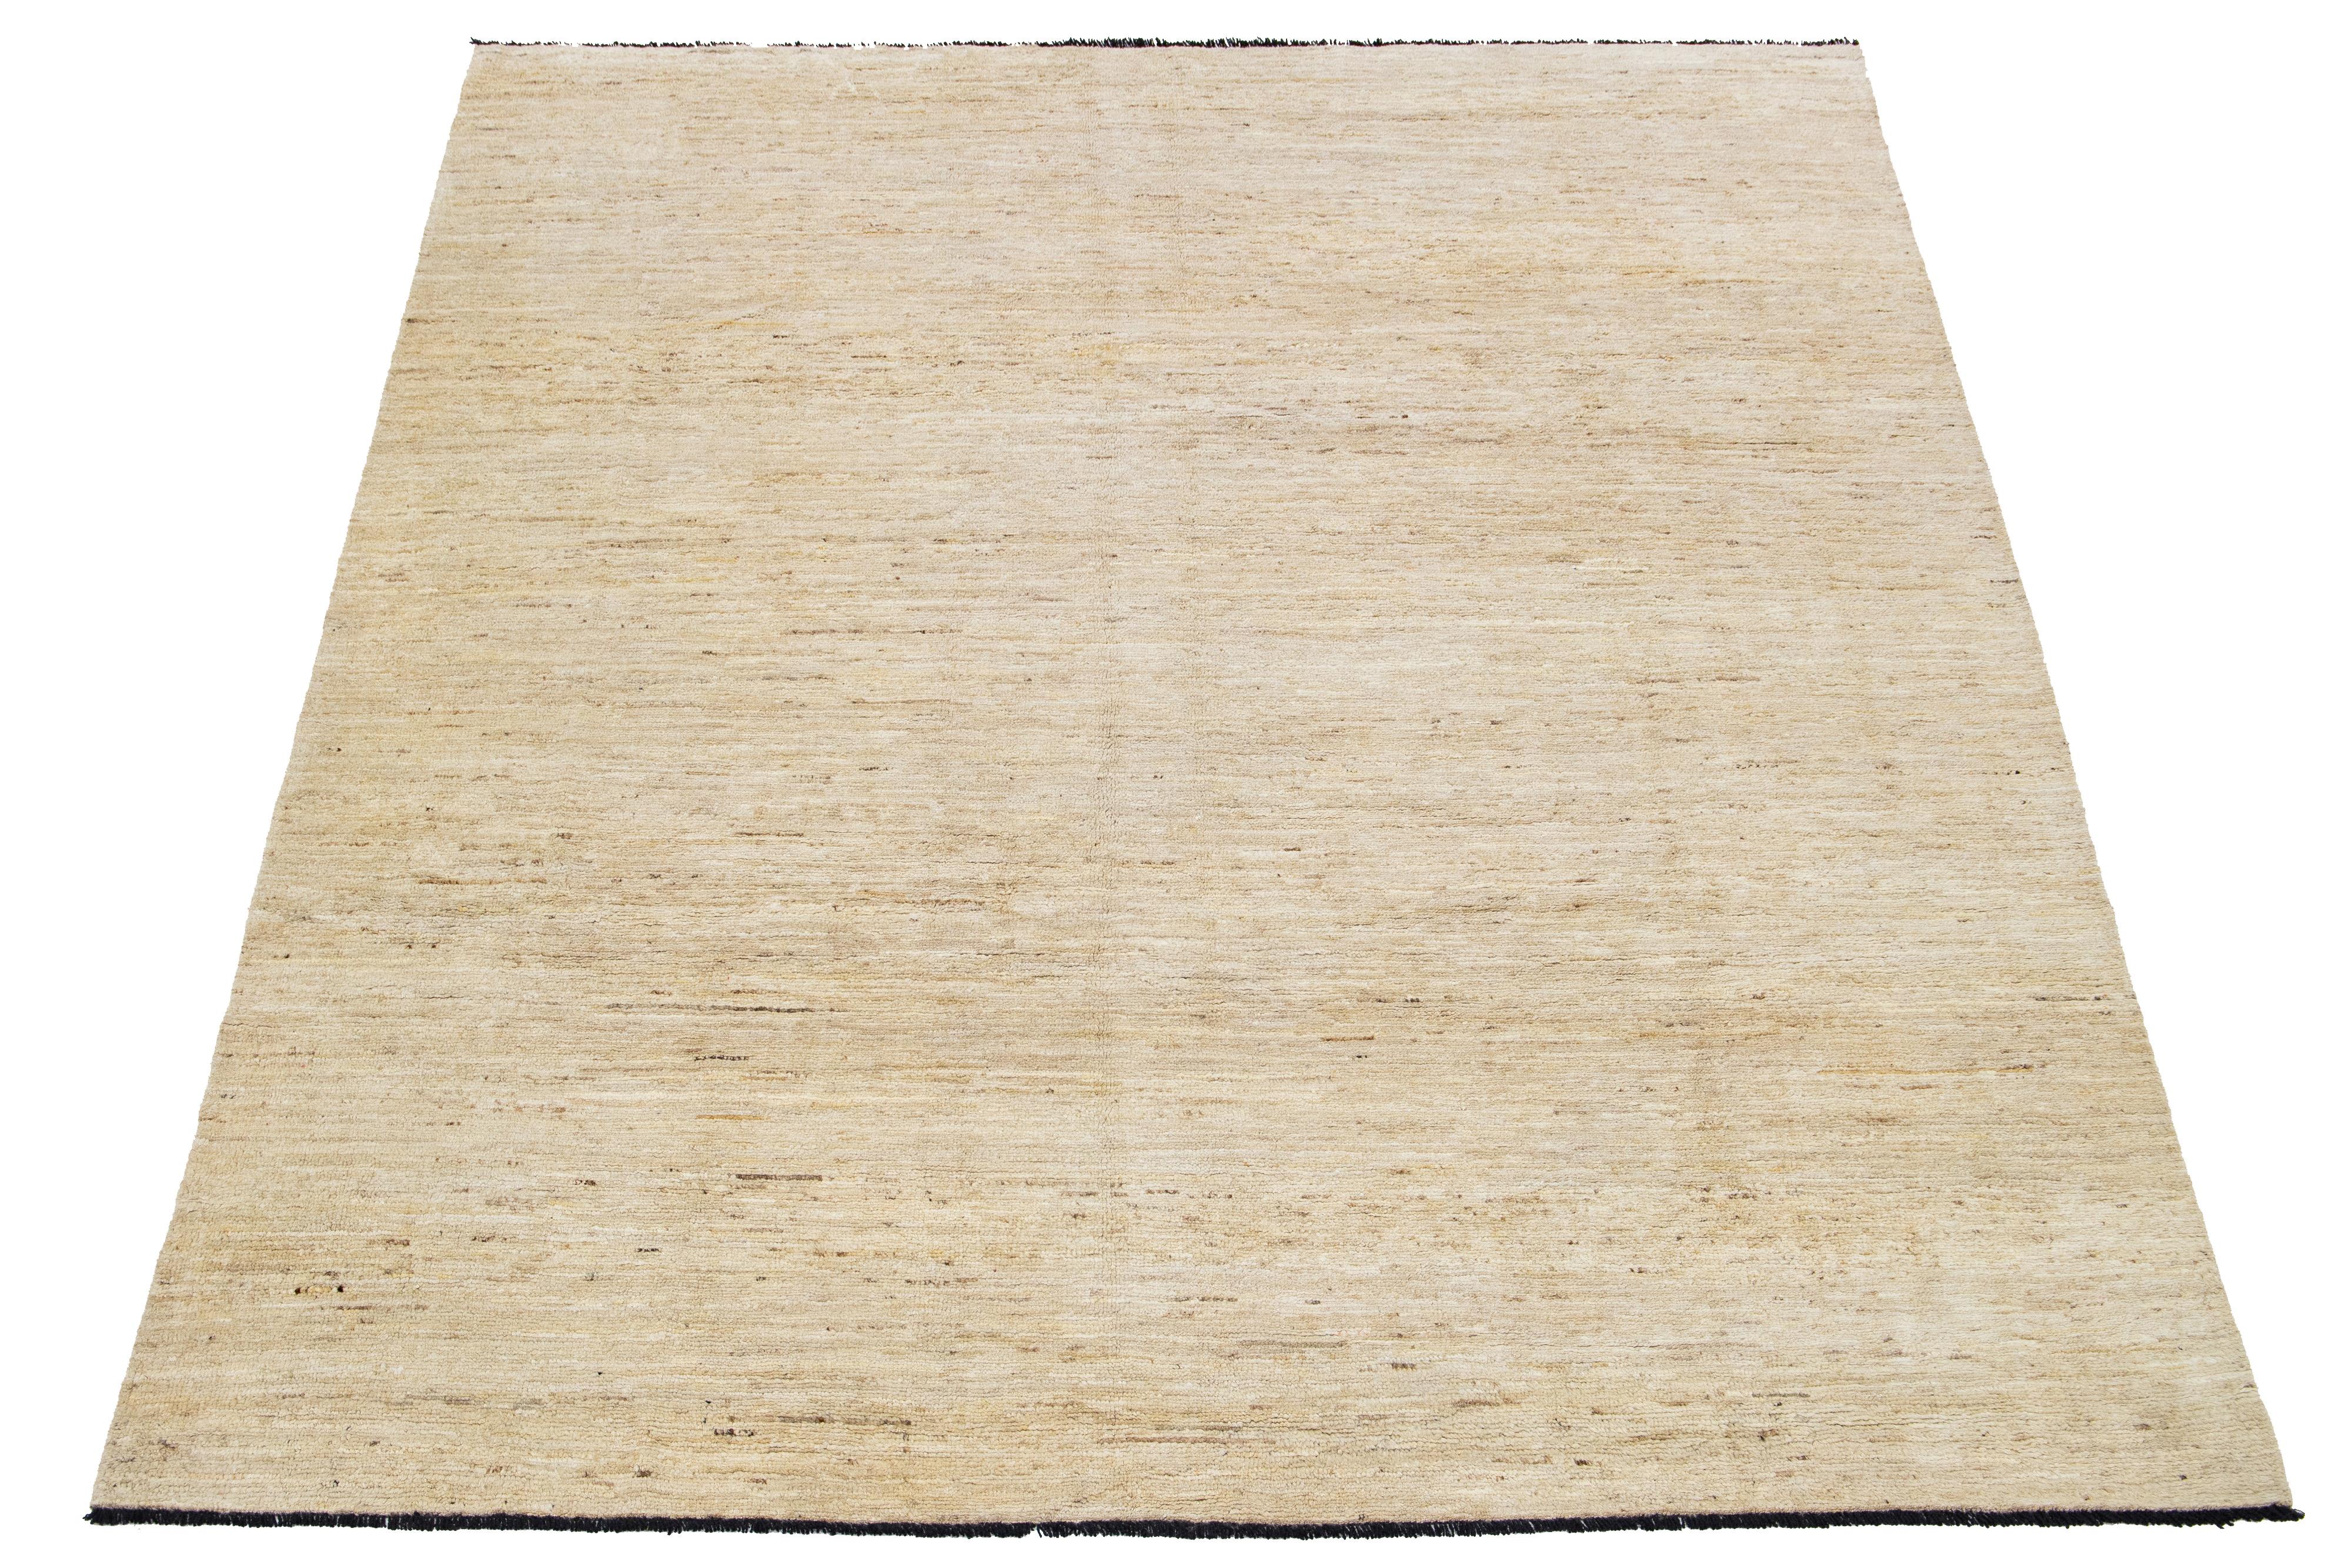 This handcrafted wool rug, designed in the Gabbeh style, showcases a solid design accentuated by brown shades against a beige background with black fringes.

This rug measures 8'2